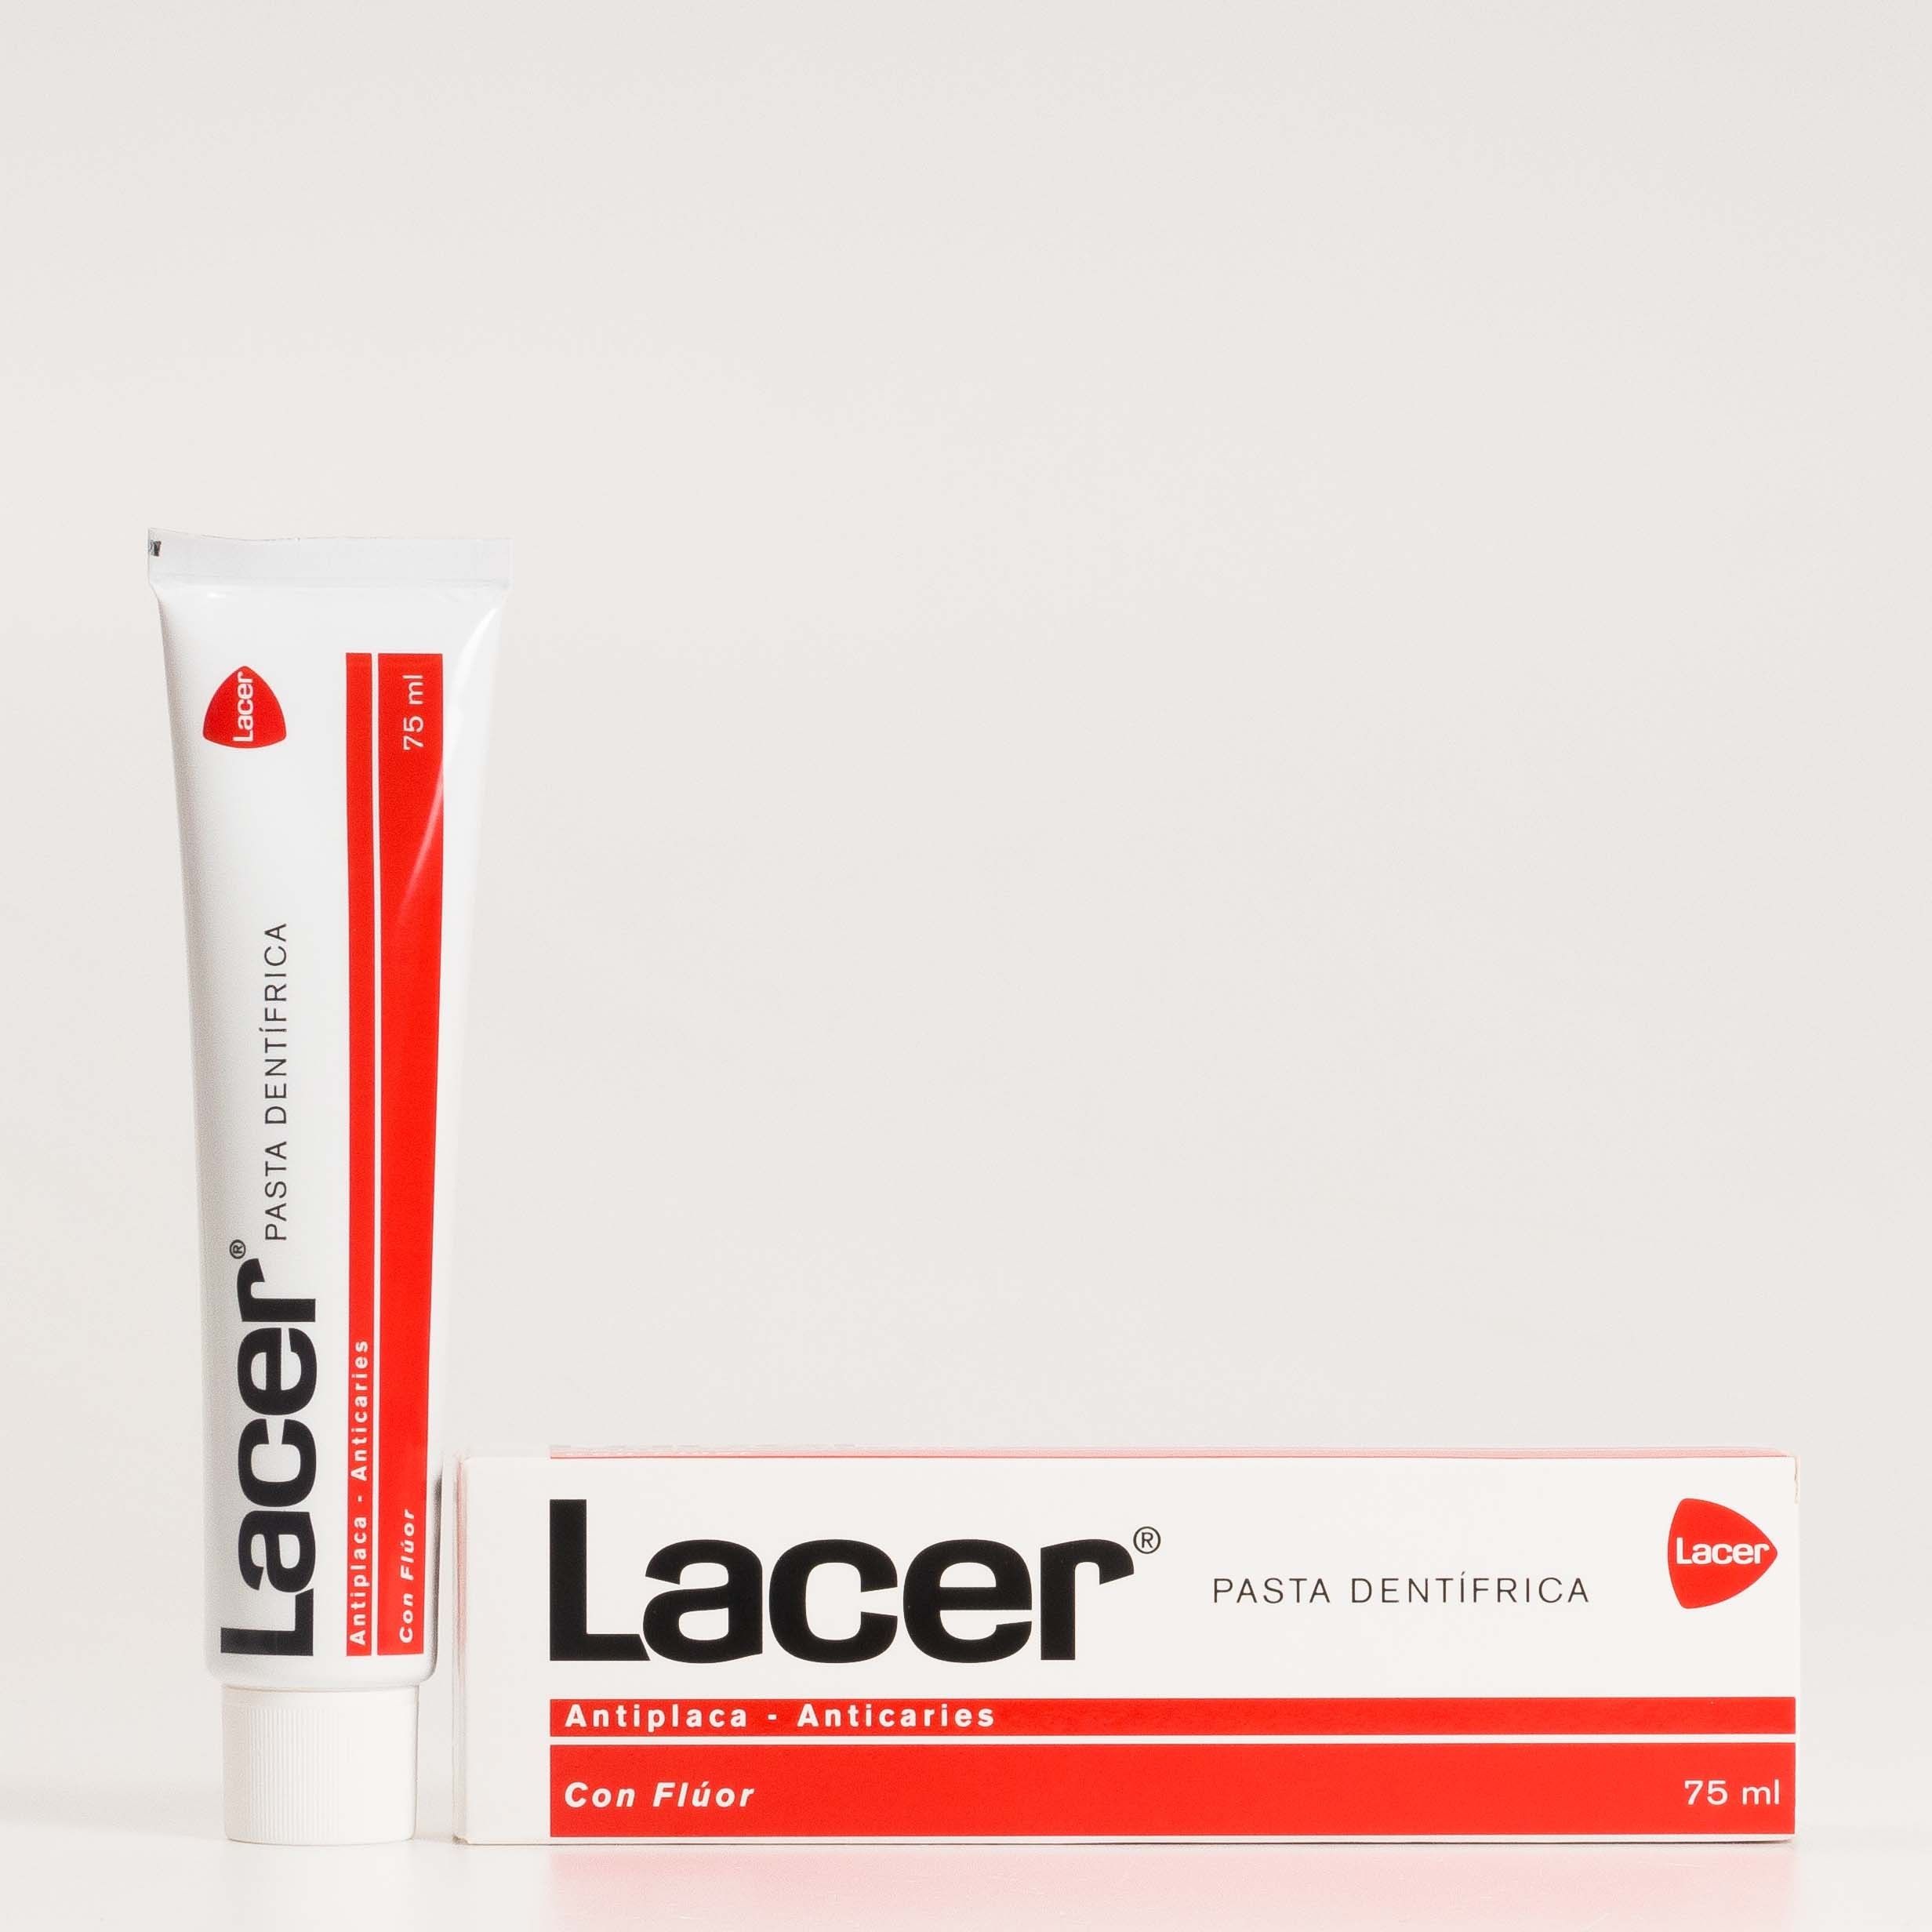 Lacer pasta dentífrica, 75ml.